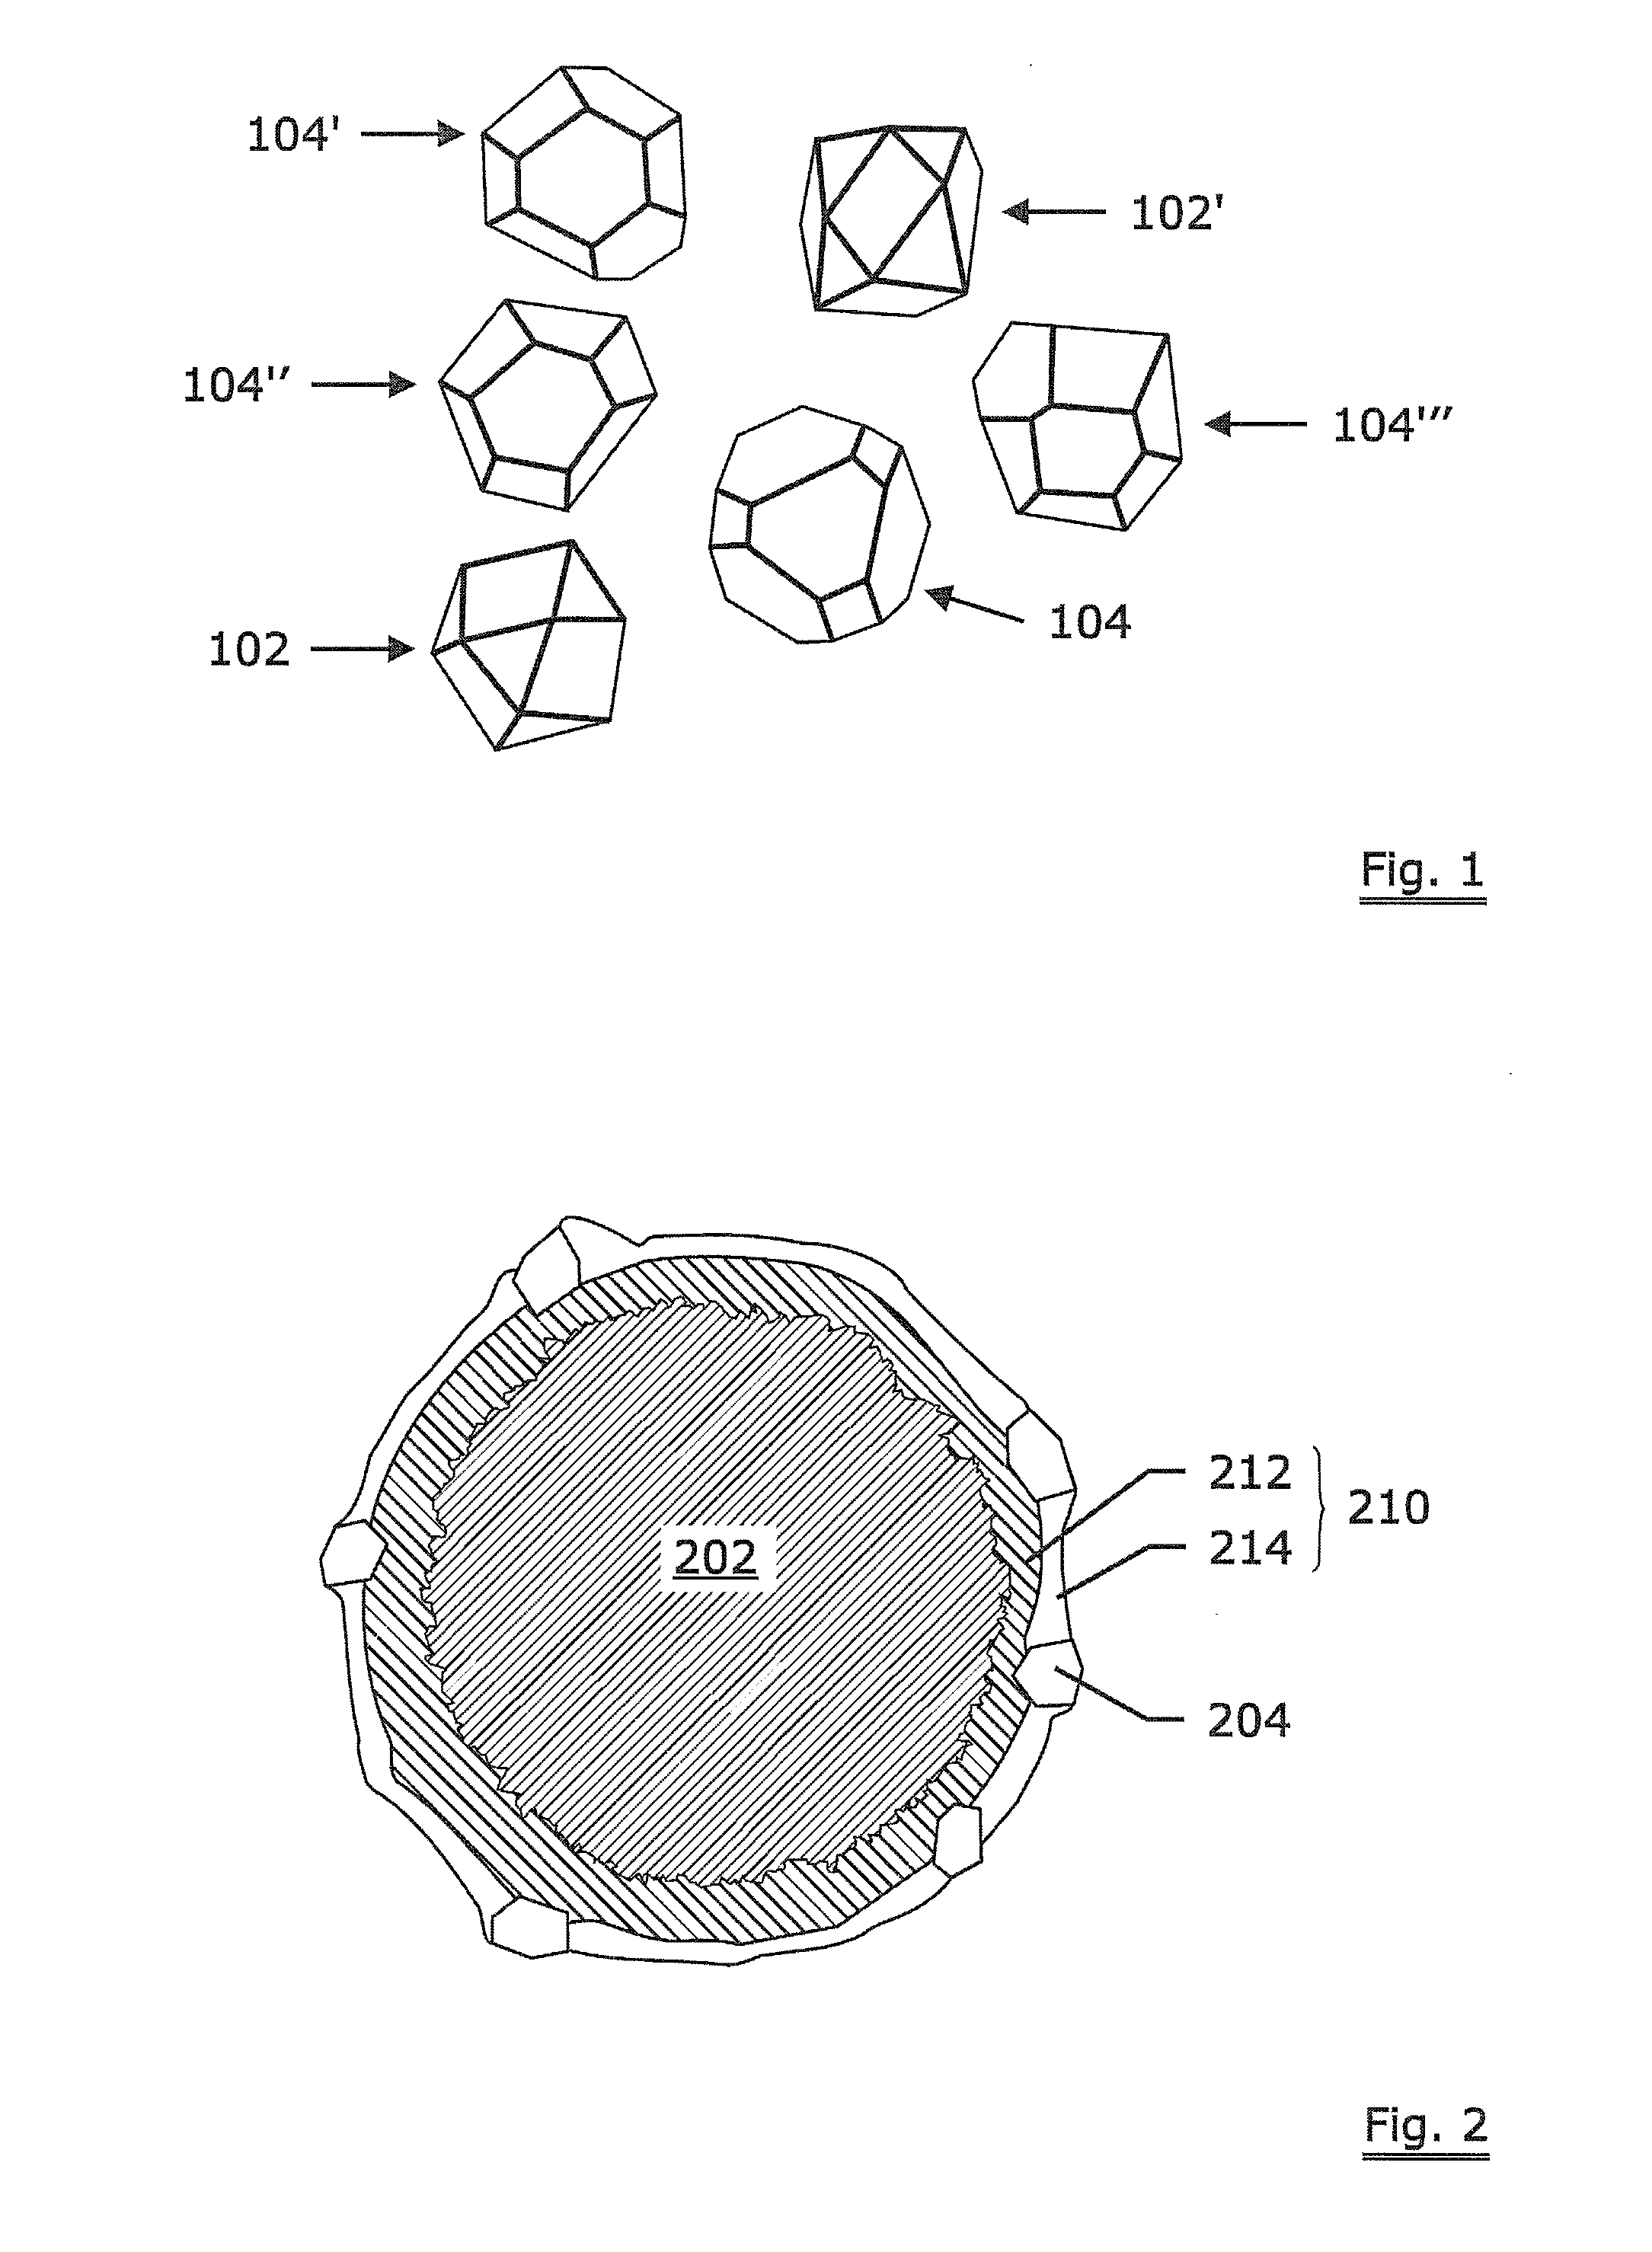 Fixed abrasive sawing wire with cubo-octahedral diamond particles